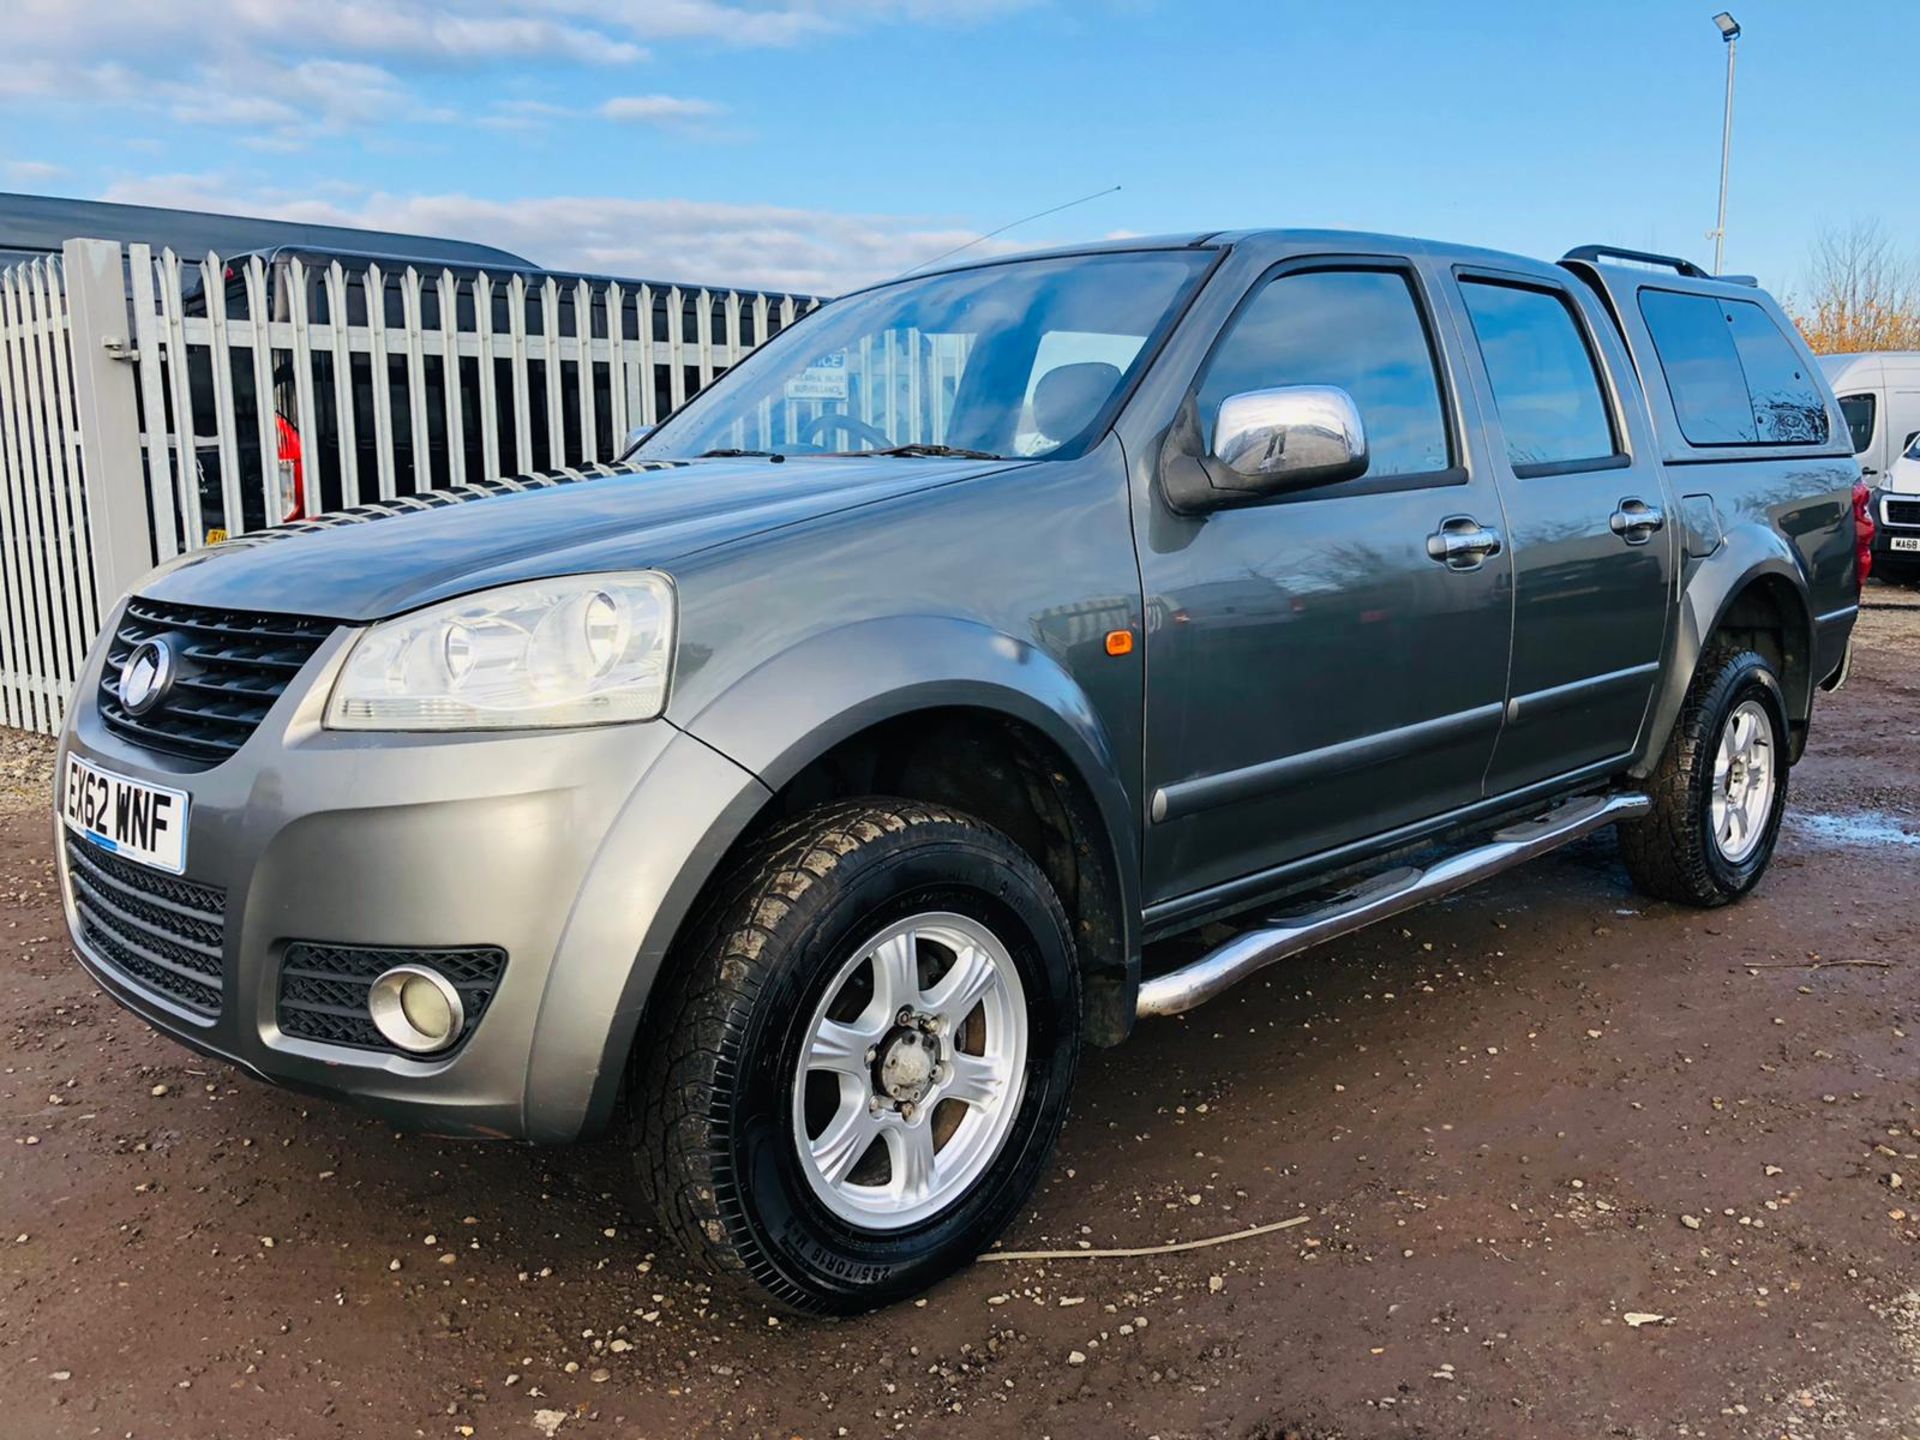 Great Wall Steed 2.0 TD 143 SE ( Special Equipment ) 4x4 Double Cab 2013 '62 Reg' - Image 5 of 24